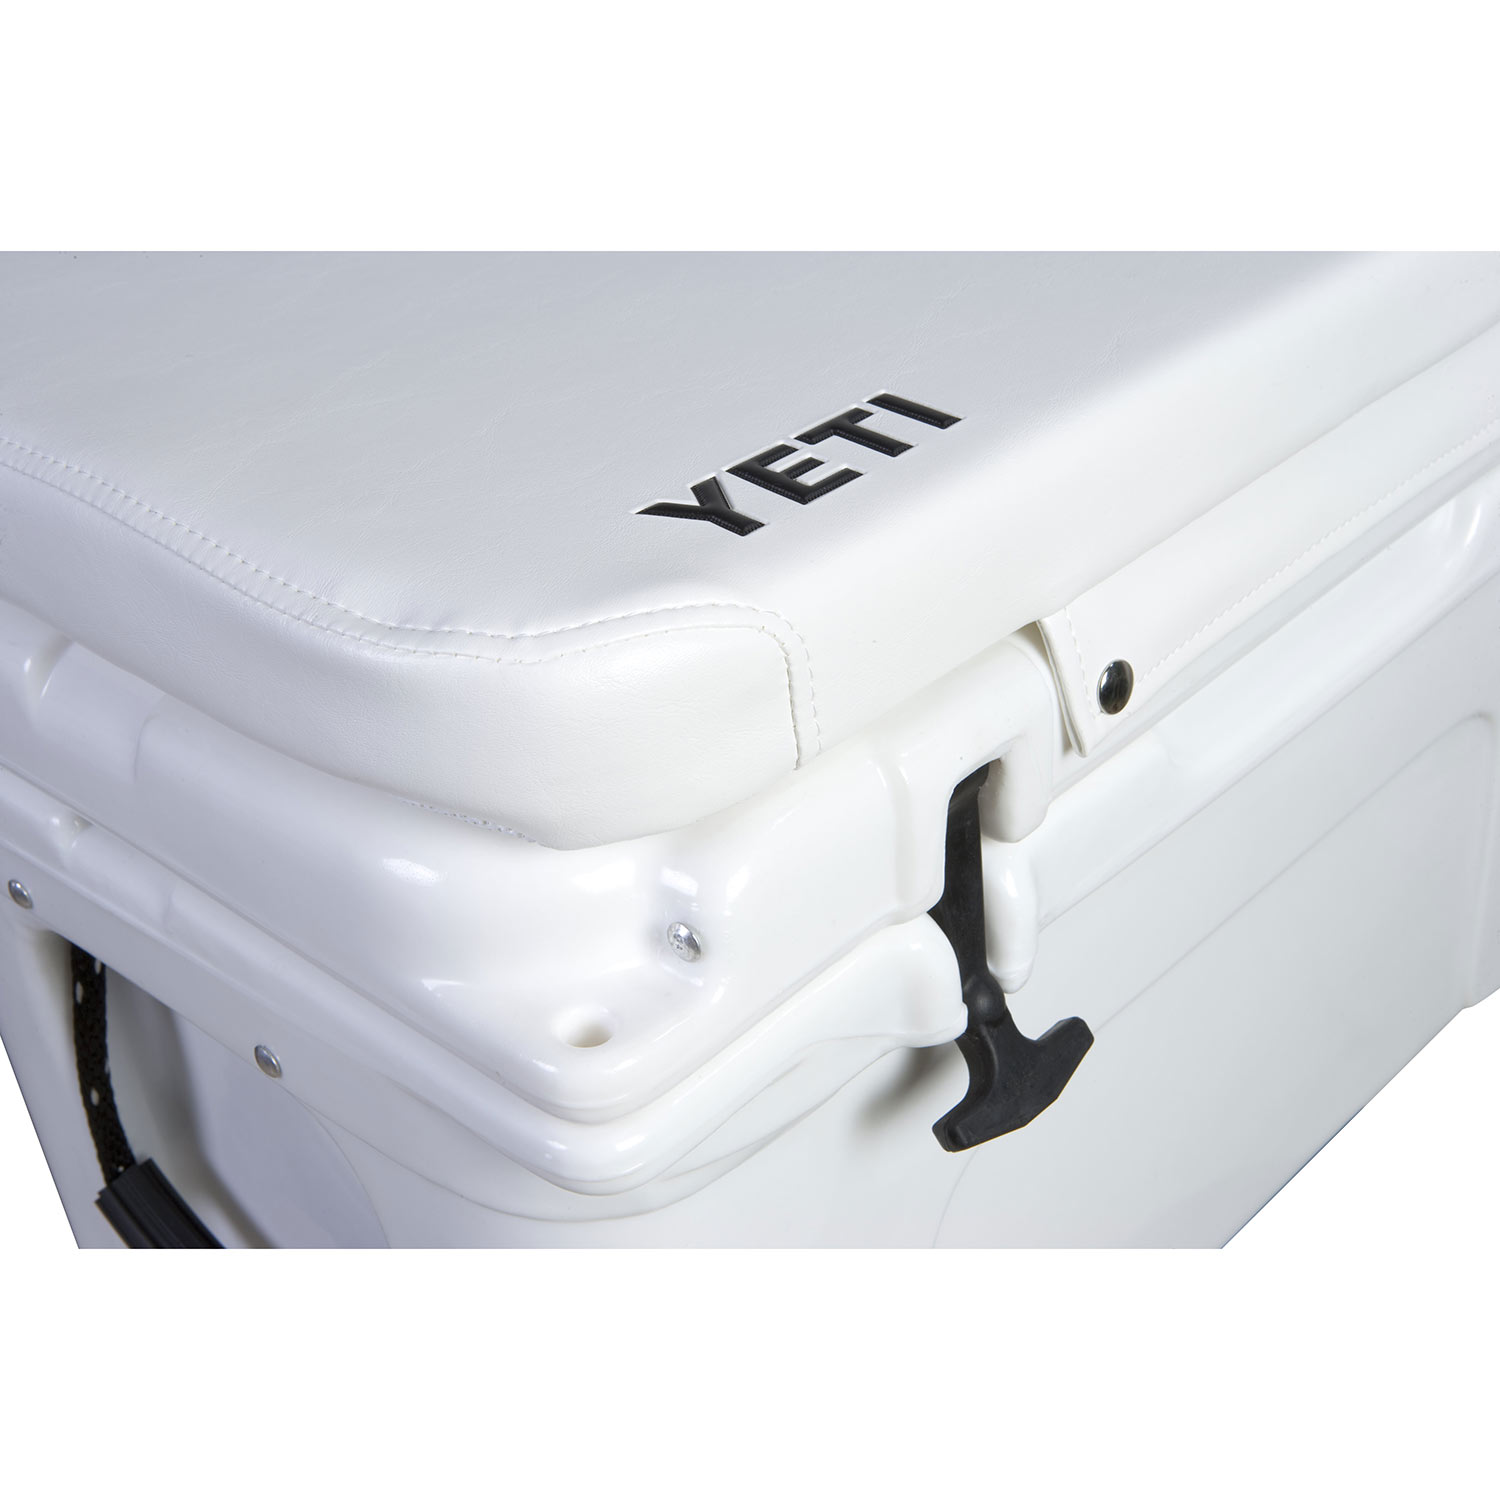 Yeti Cooler Cushions - Comfort For Your Adventure